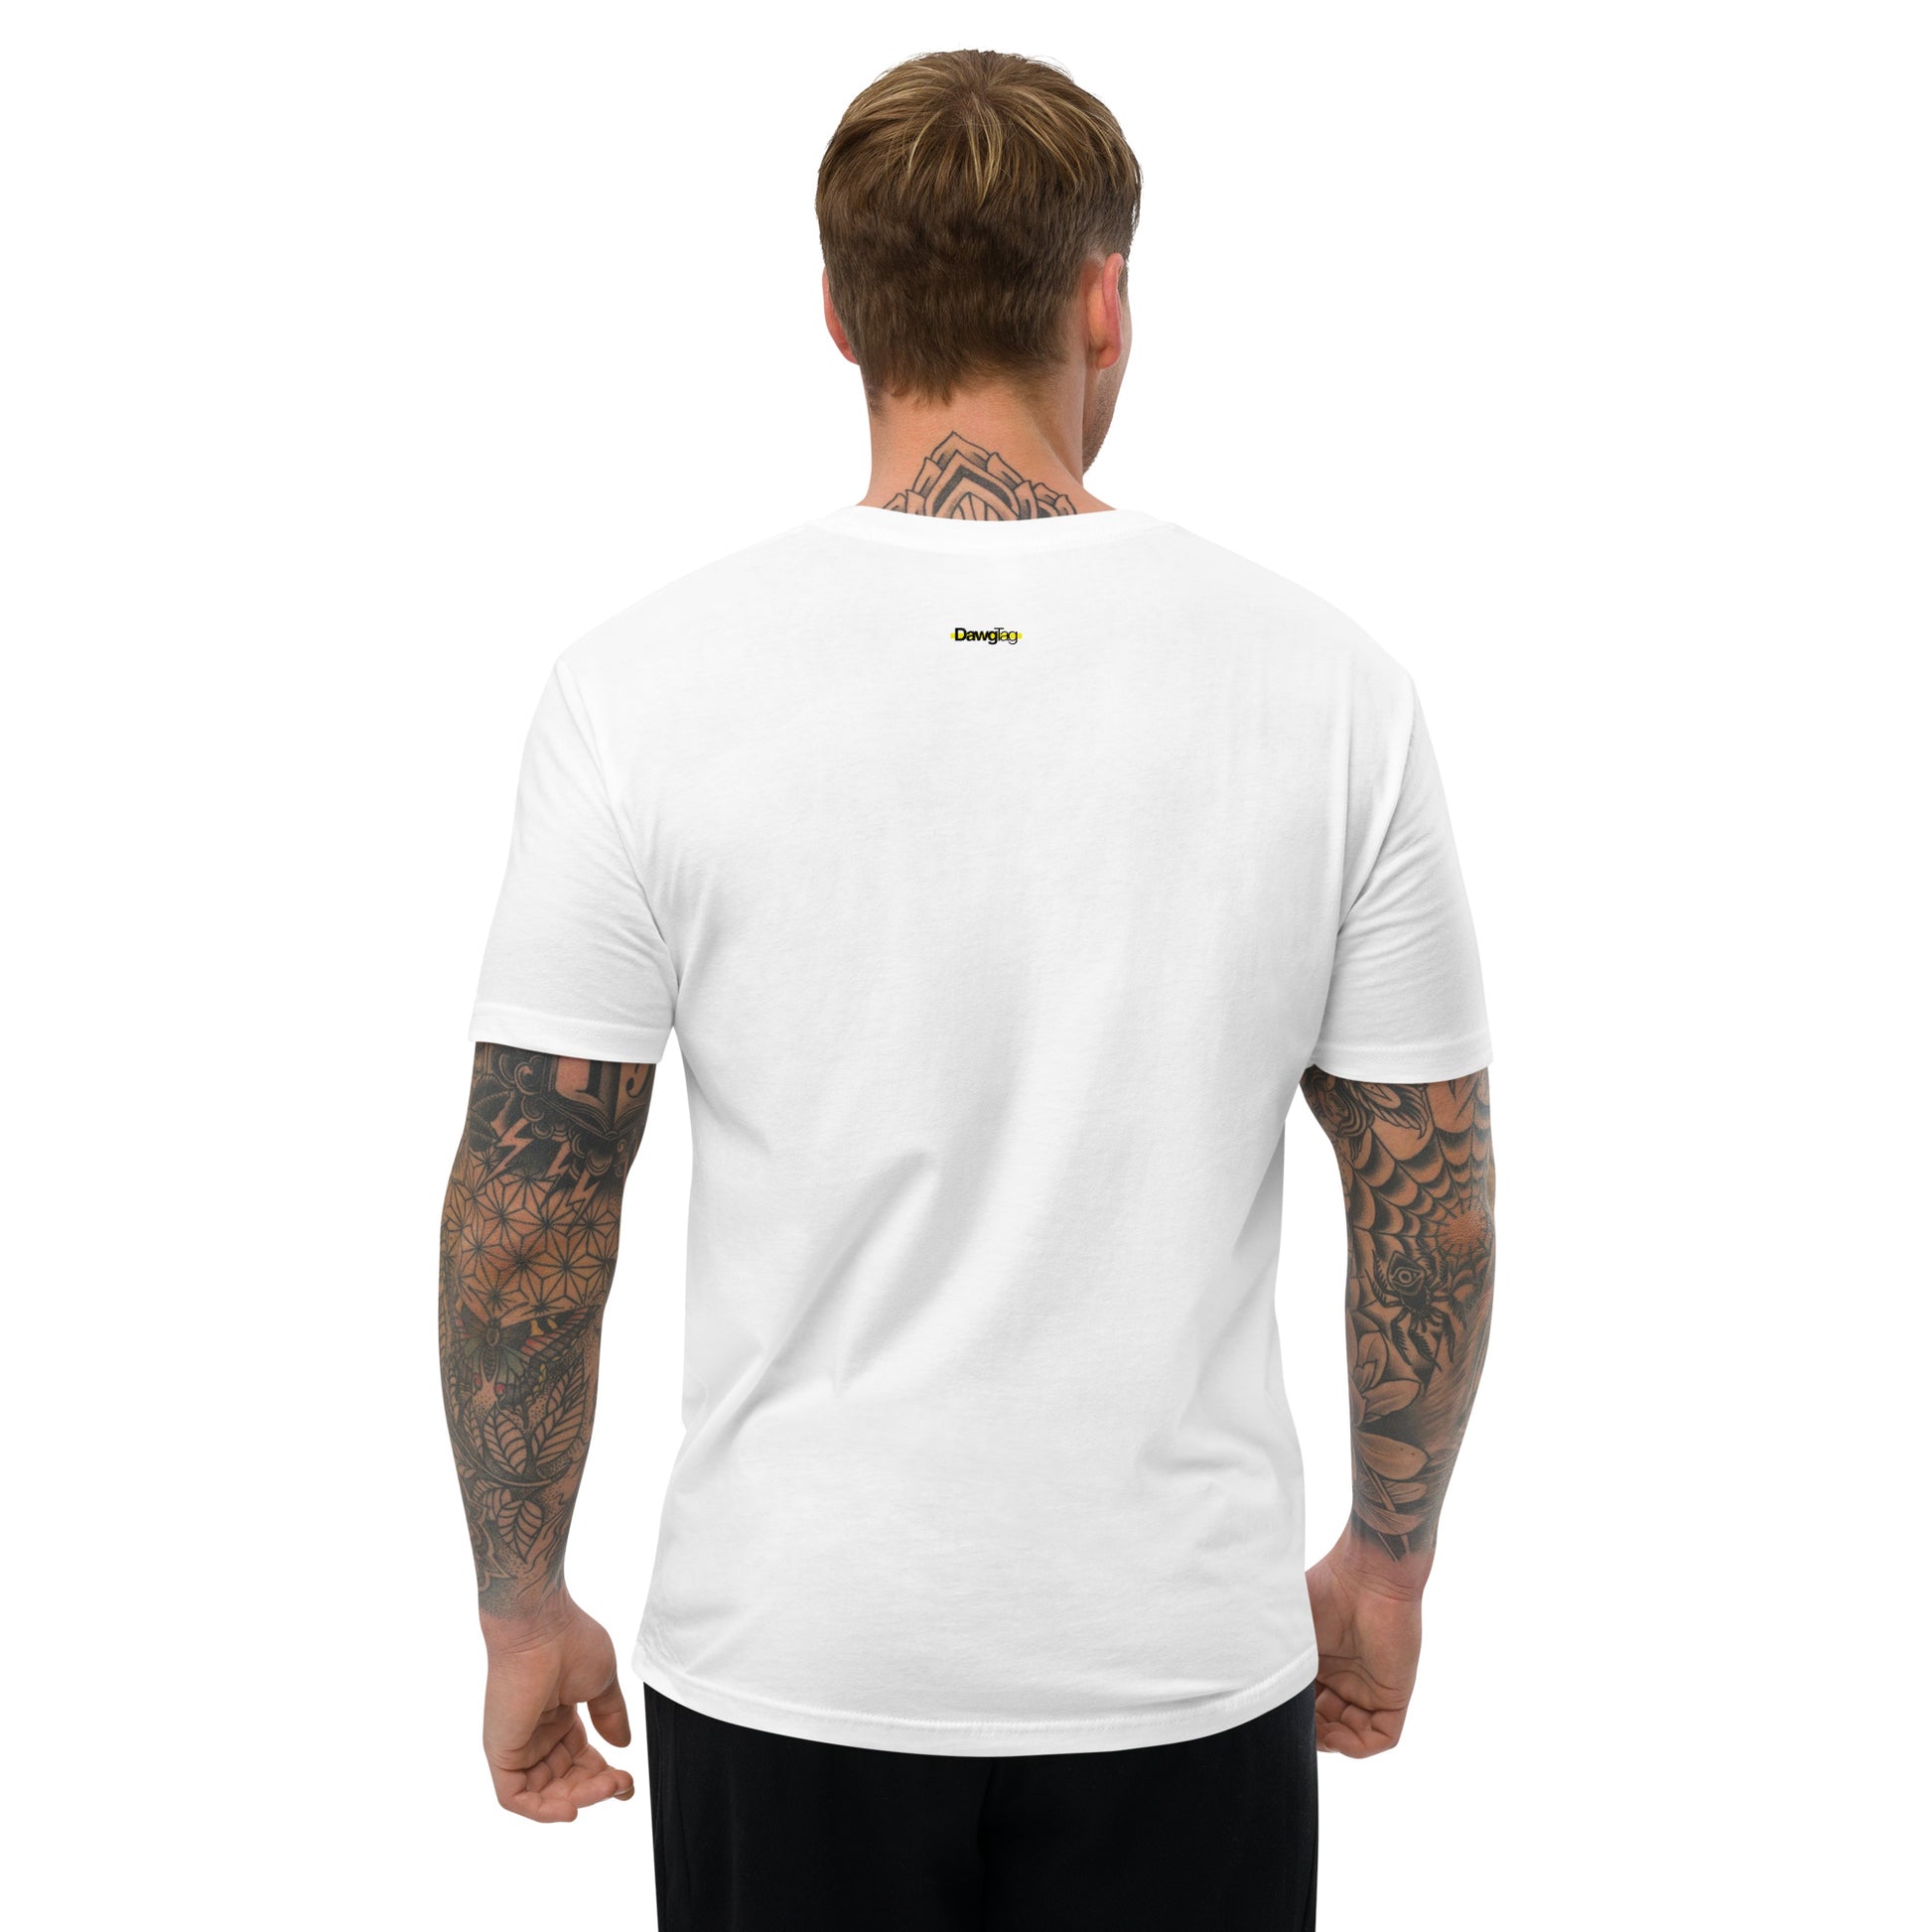 Rear view of a white slim-fit t-shirt worn by a man